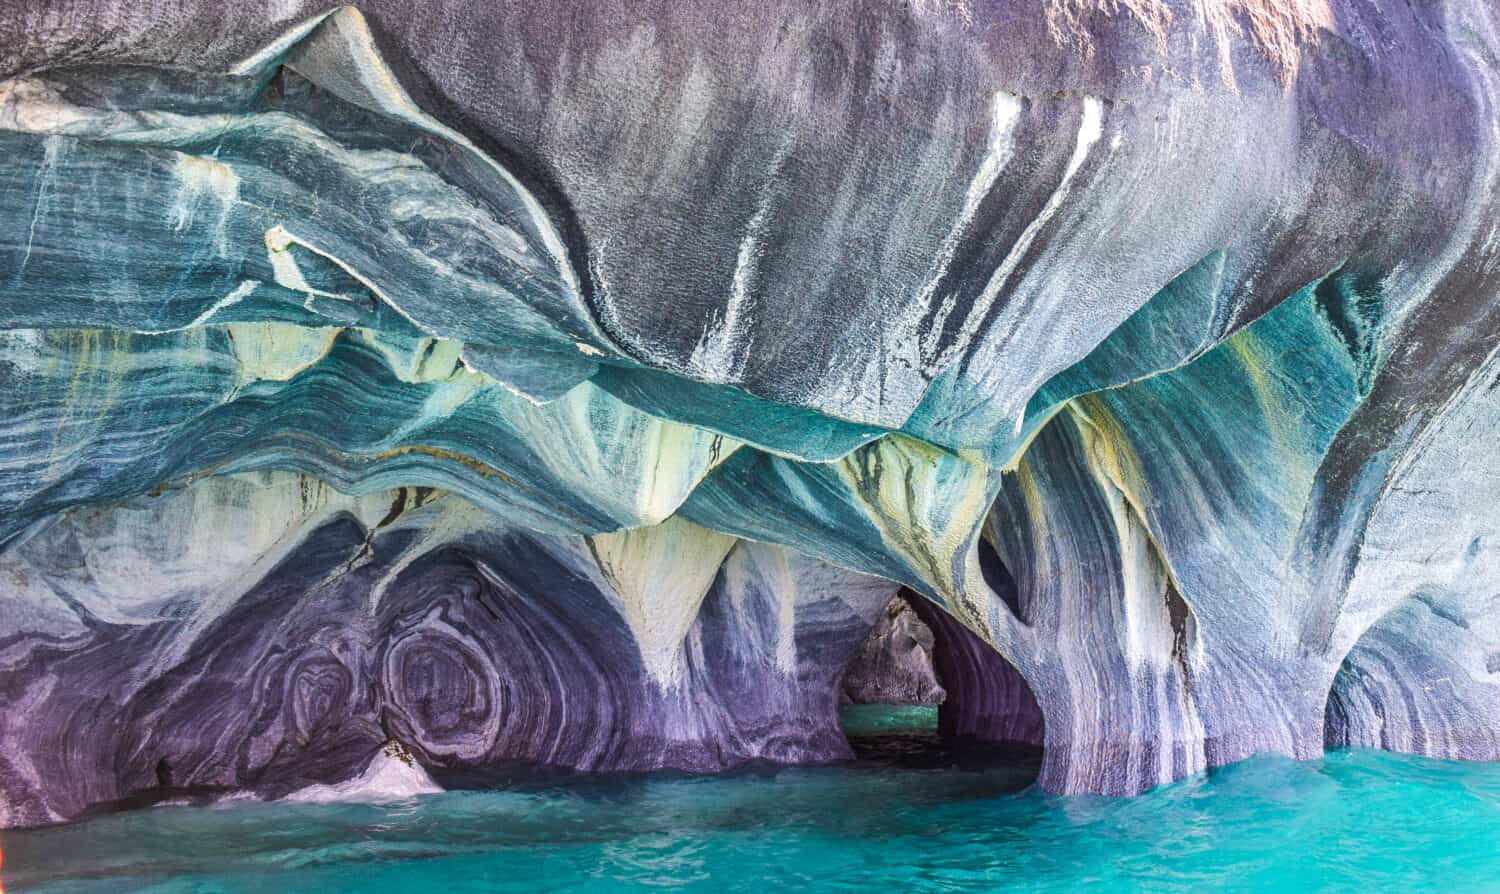 The blue colors of the marble caves in patagonia, chile.